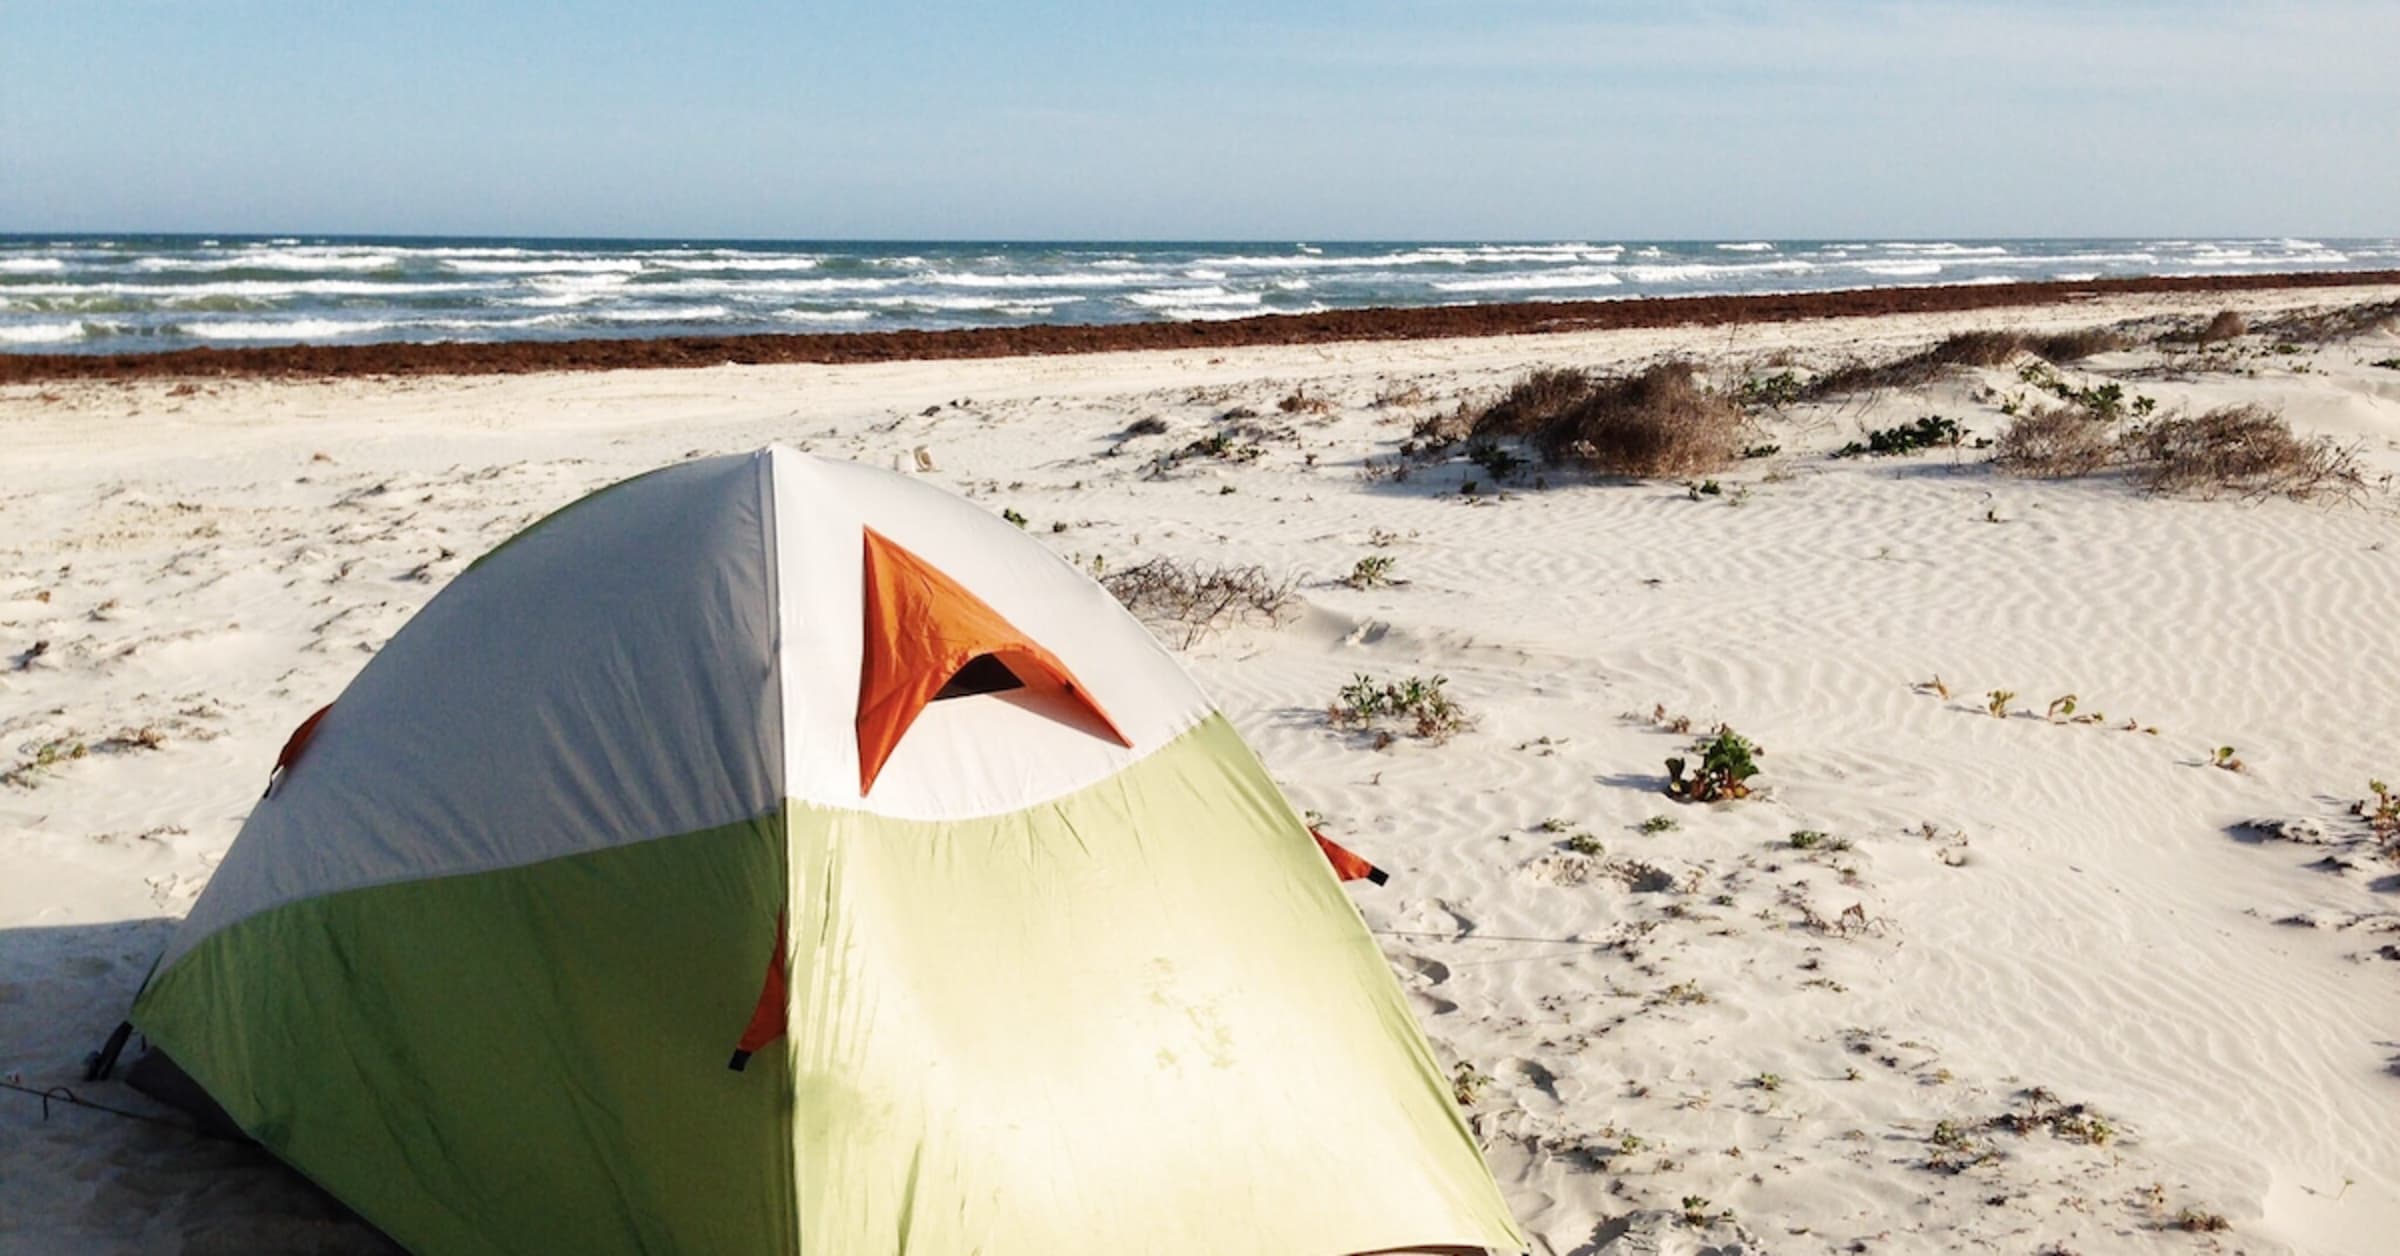 What Beaches Can You Camp on in Texas?